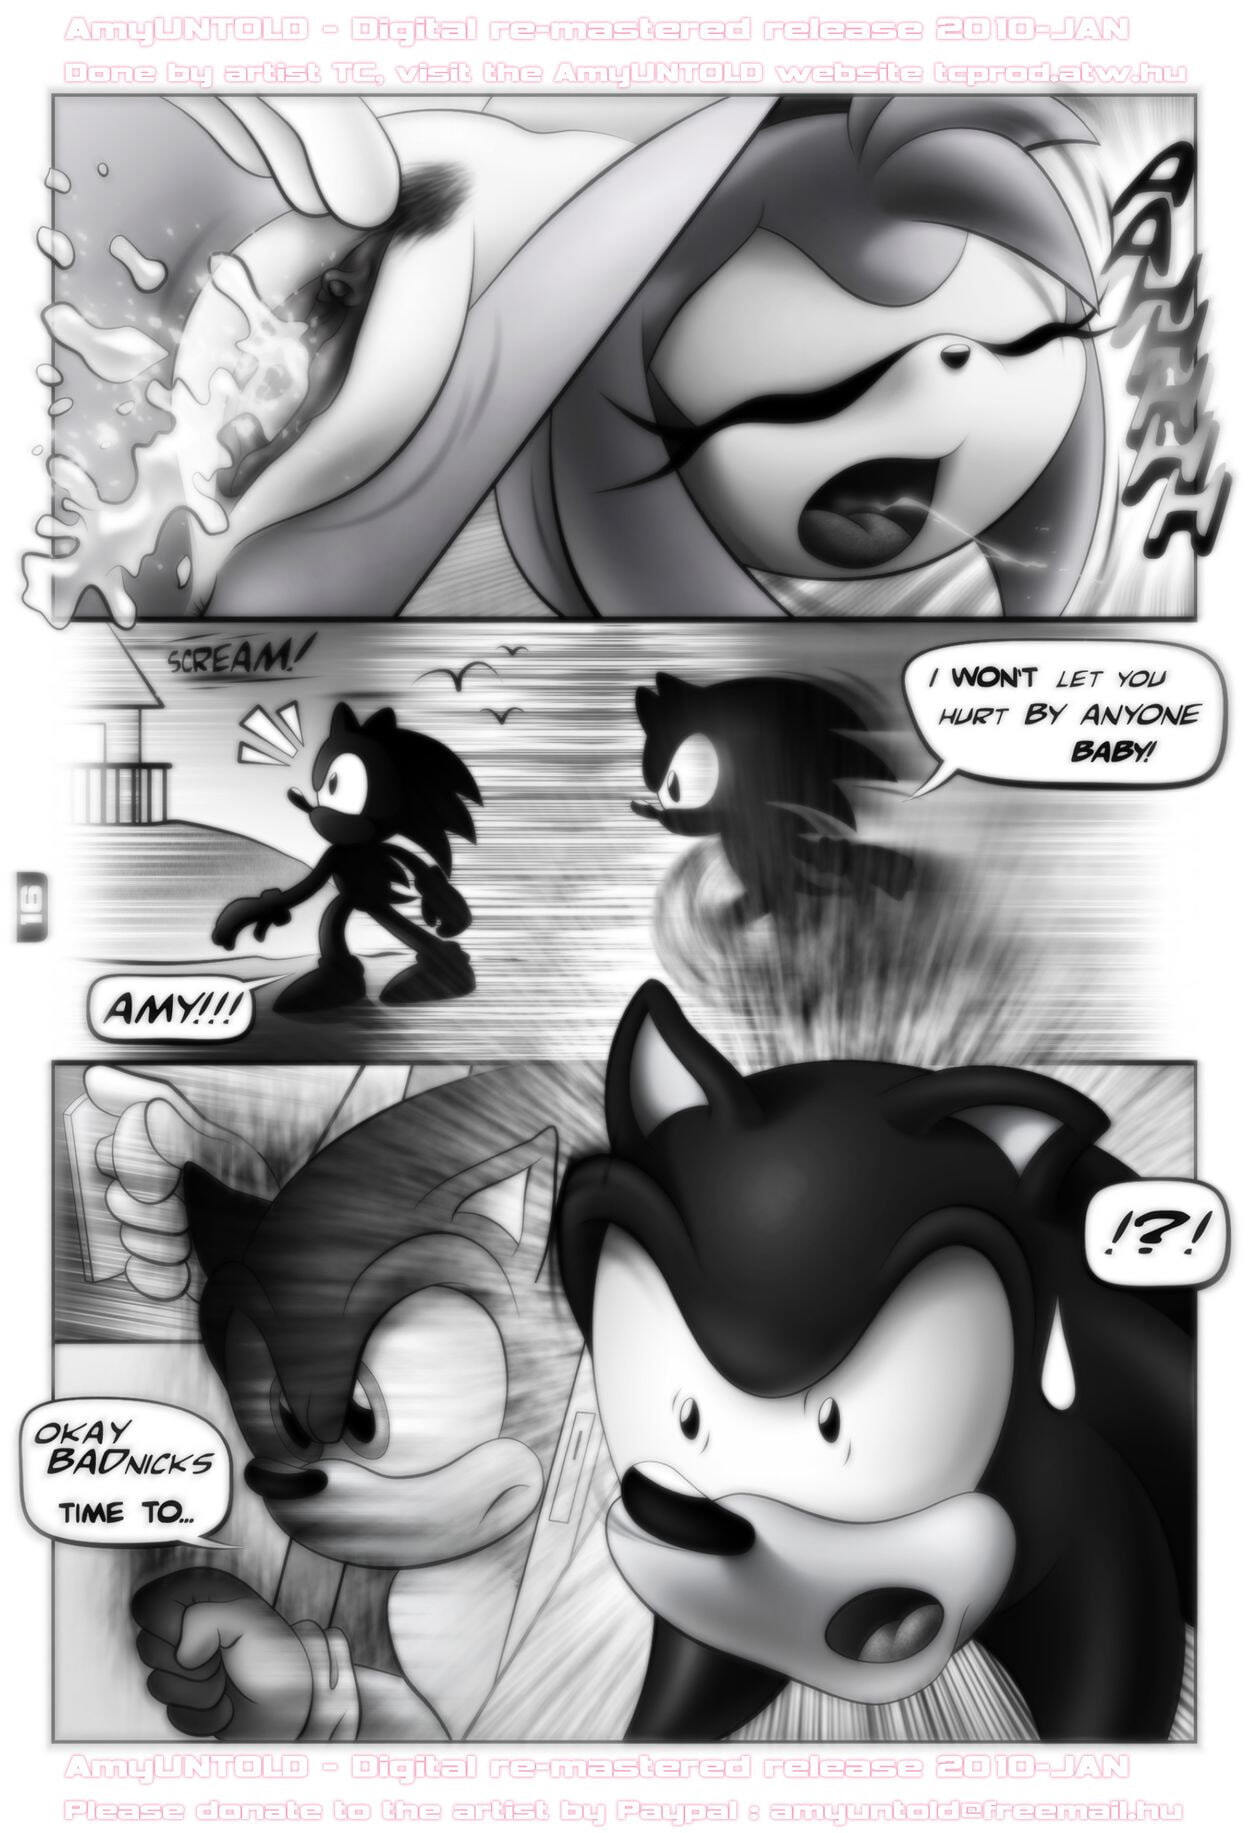 Amy Untold - Finally - Page 16